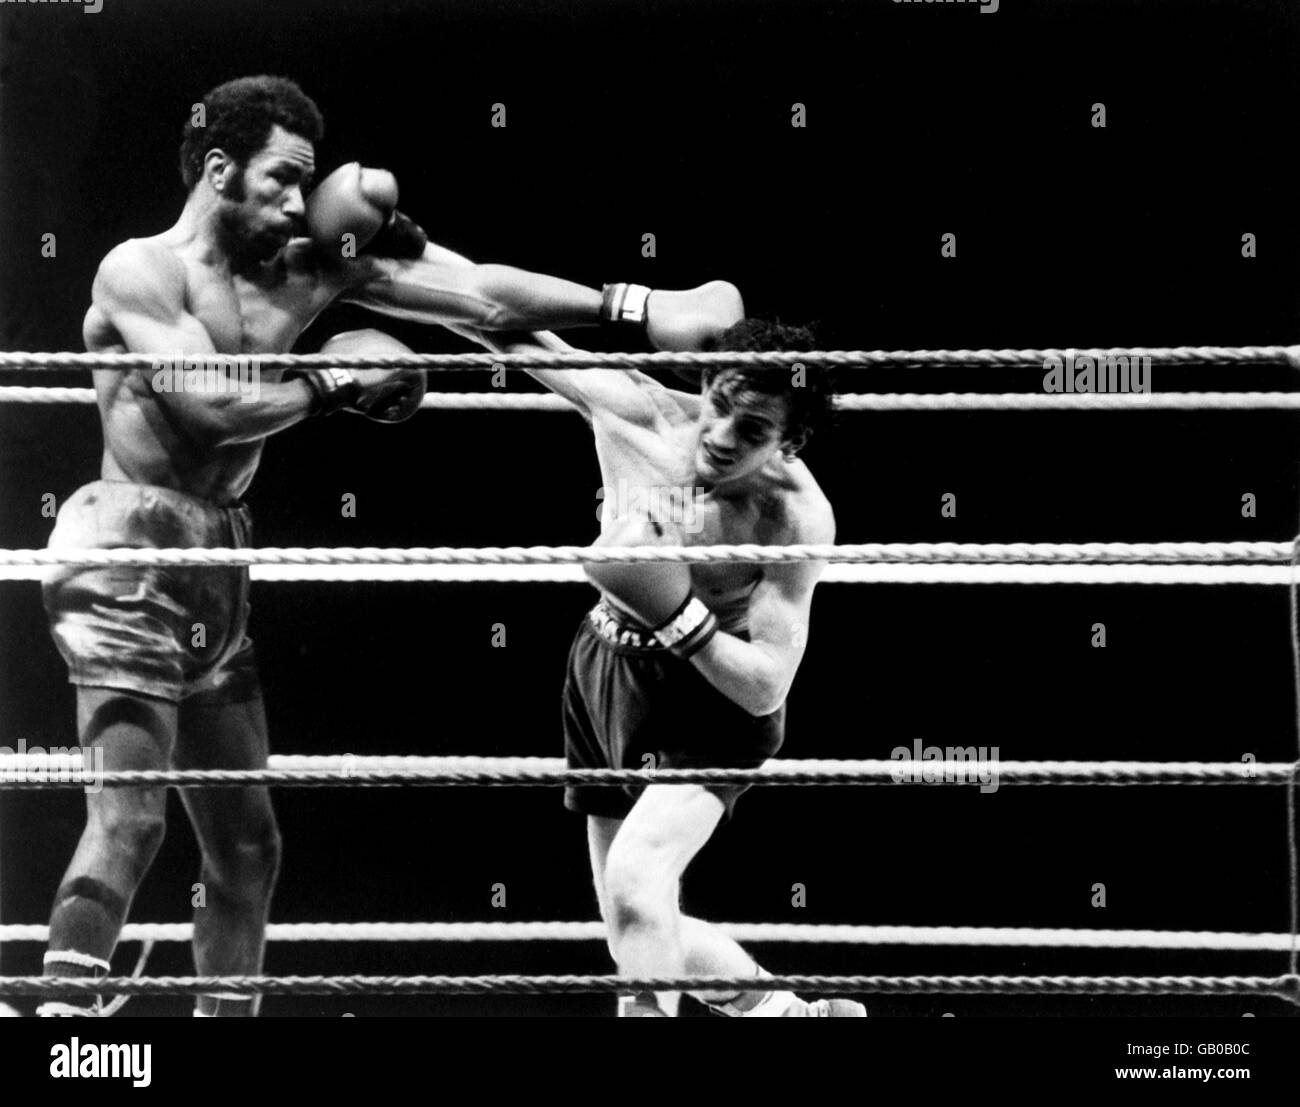 Ireland's Barry McGuigan (r) and Panama's Eusebio Pedroza (l) trade blows in their WBA title fight Stock Photo